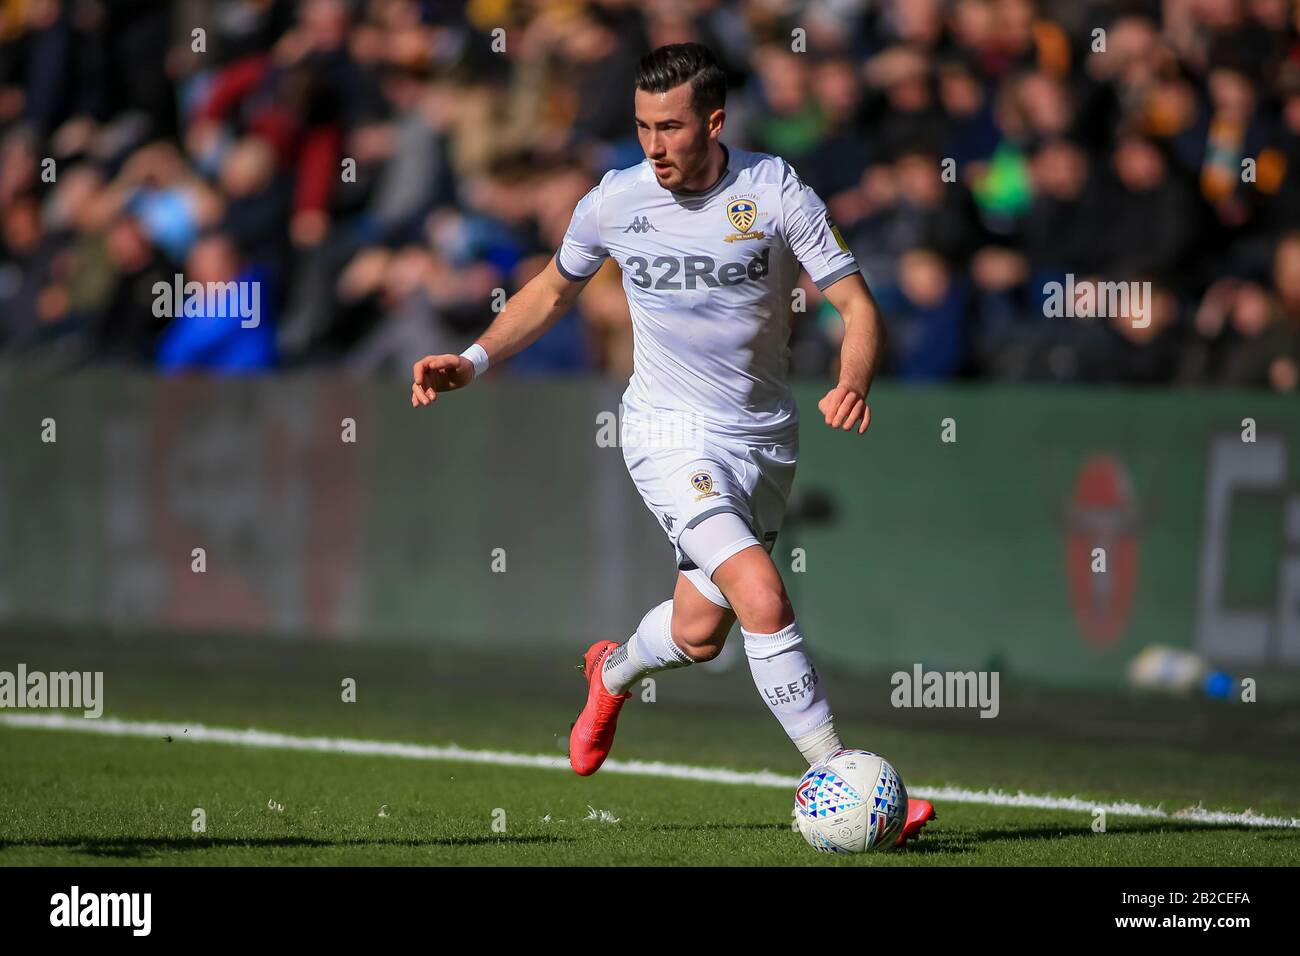 29th February 2020, KCOM Stadium, Hull, England; Sky Bet Championship, Hull City v Leeds United : Jack Harrison (22) of Leeds United in action during the game Stock Photo